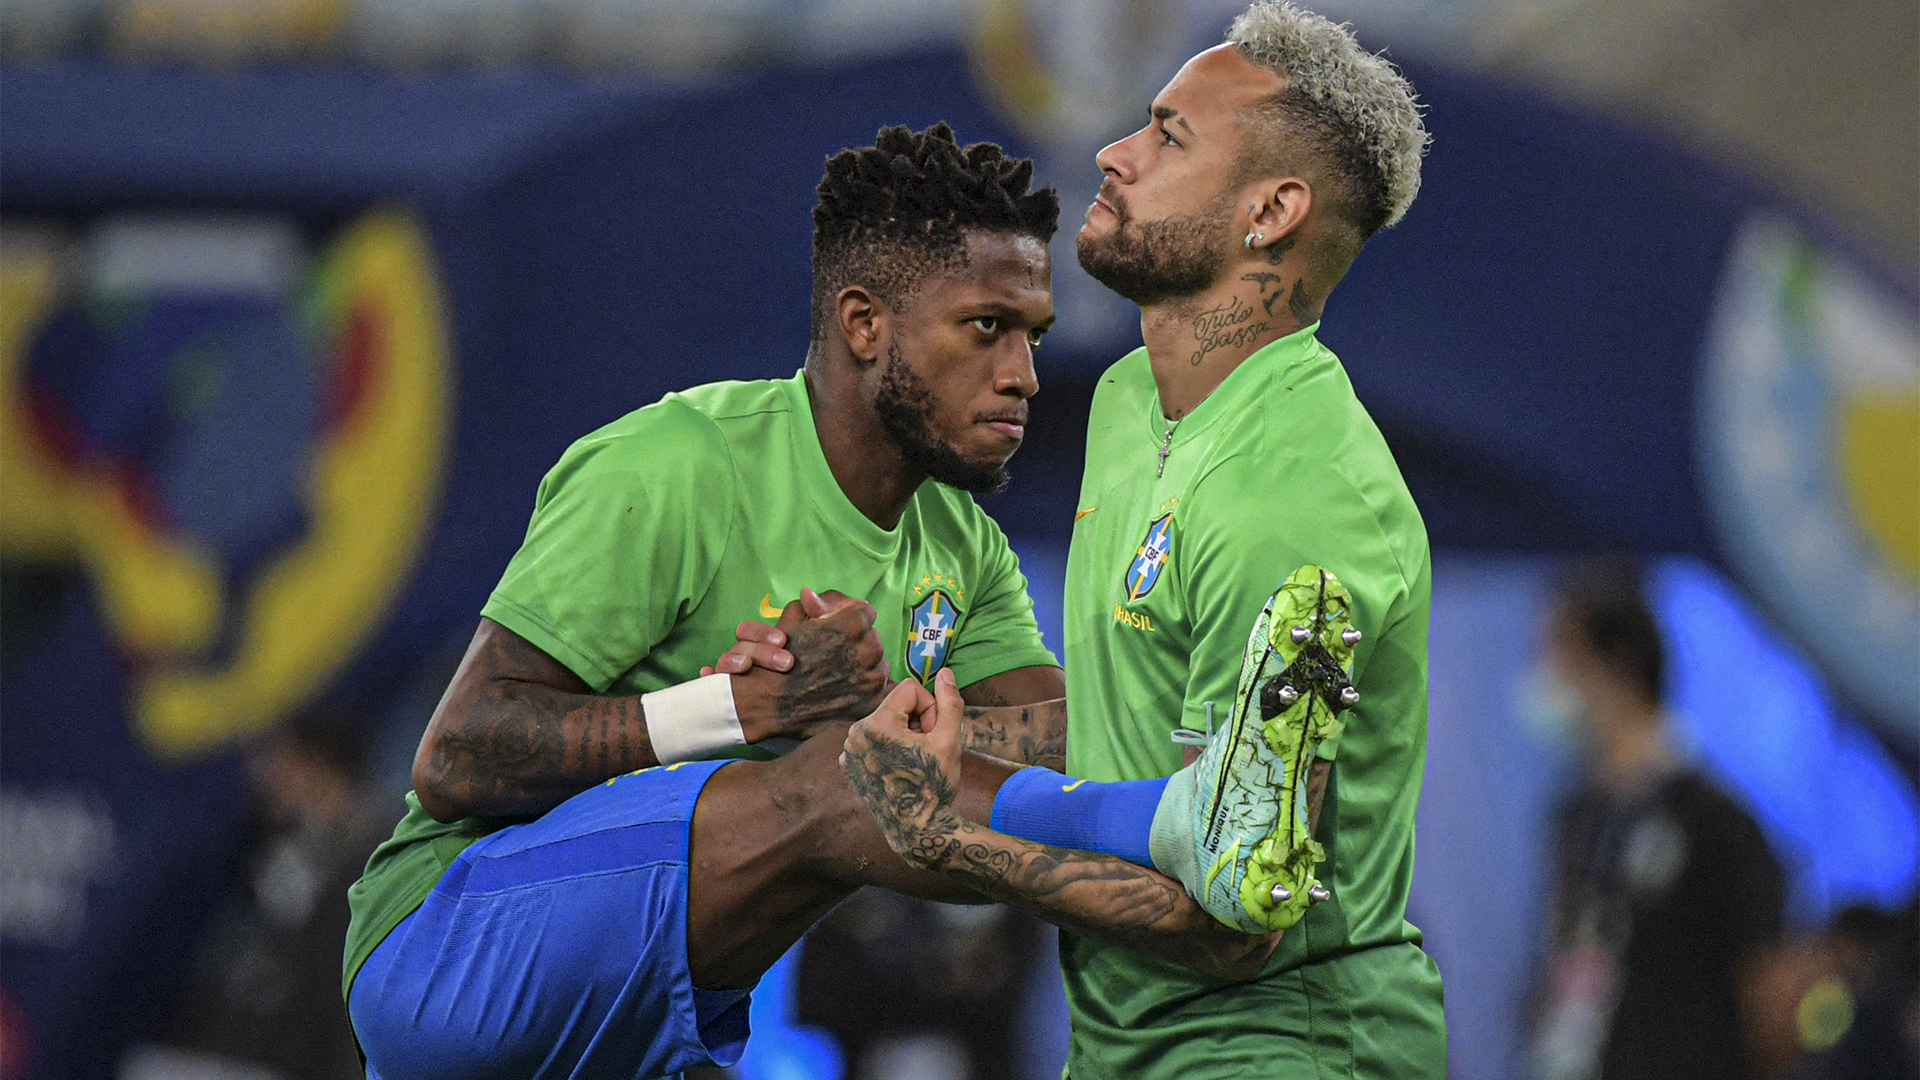 Neymar may never win Ballon D'Or but Brazil have dazzling young talents in  Vinicius Junior, Rodrygo and Lucas Paqueta